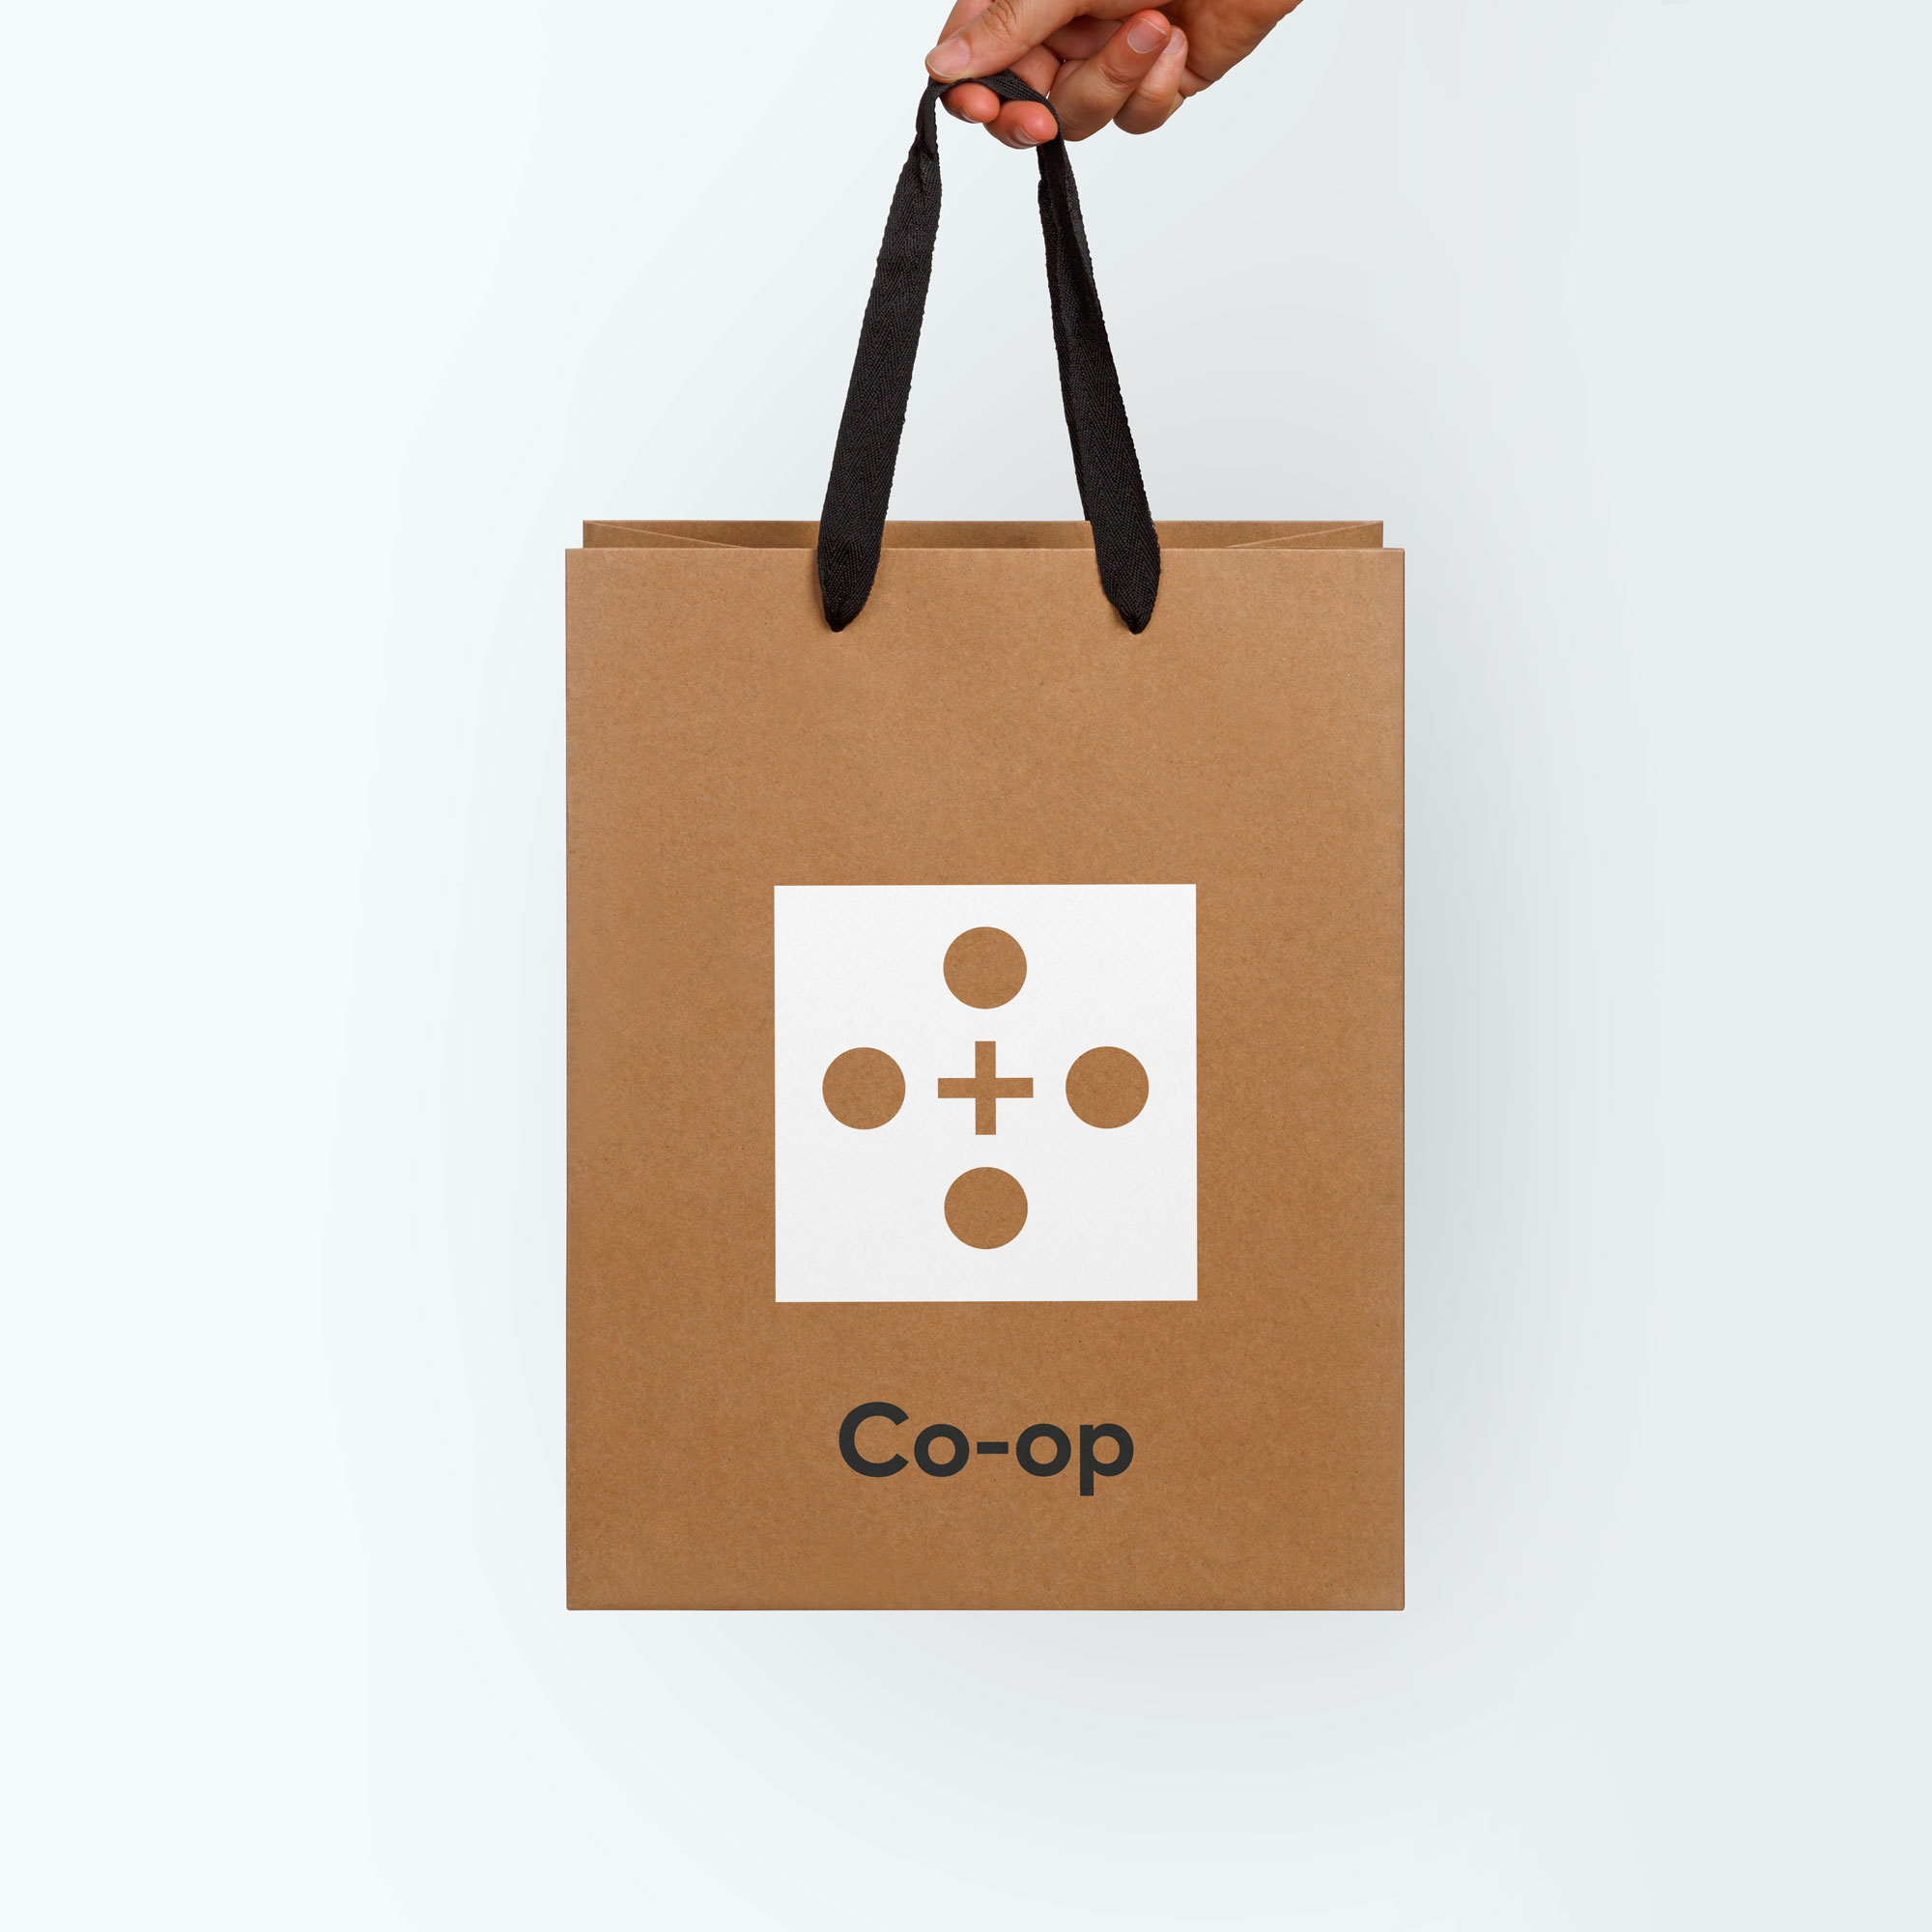 andreas_weiland_first_round_coop_bag